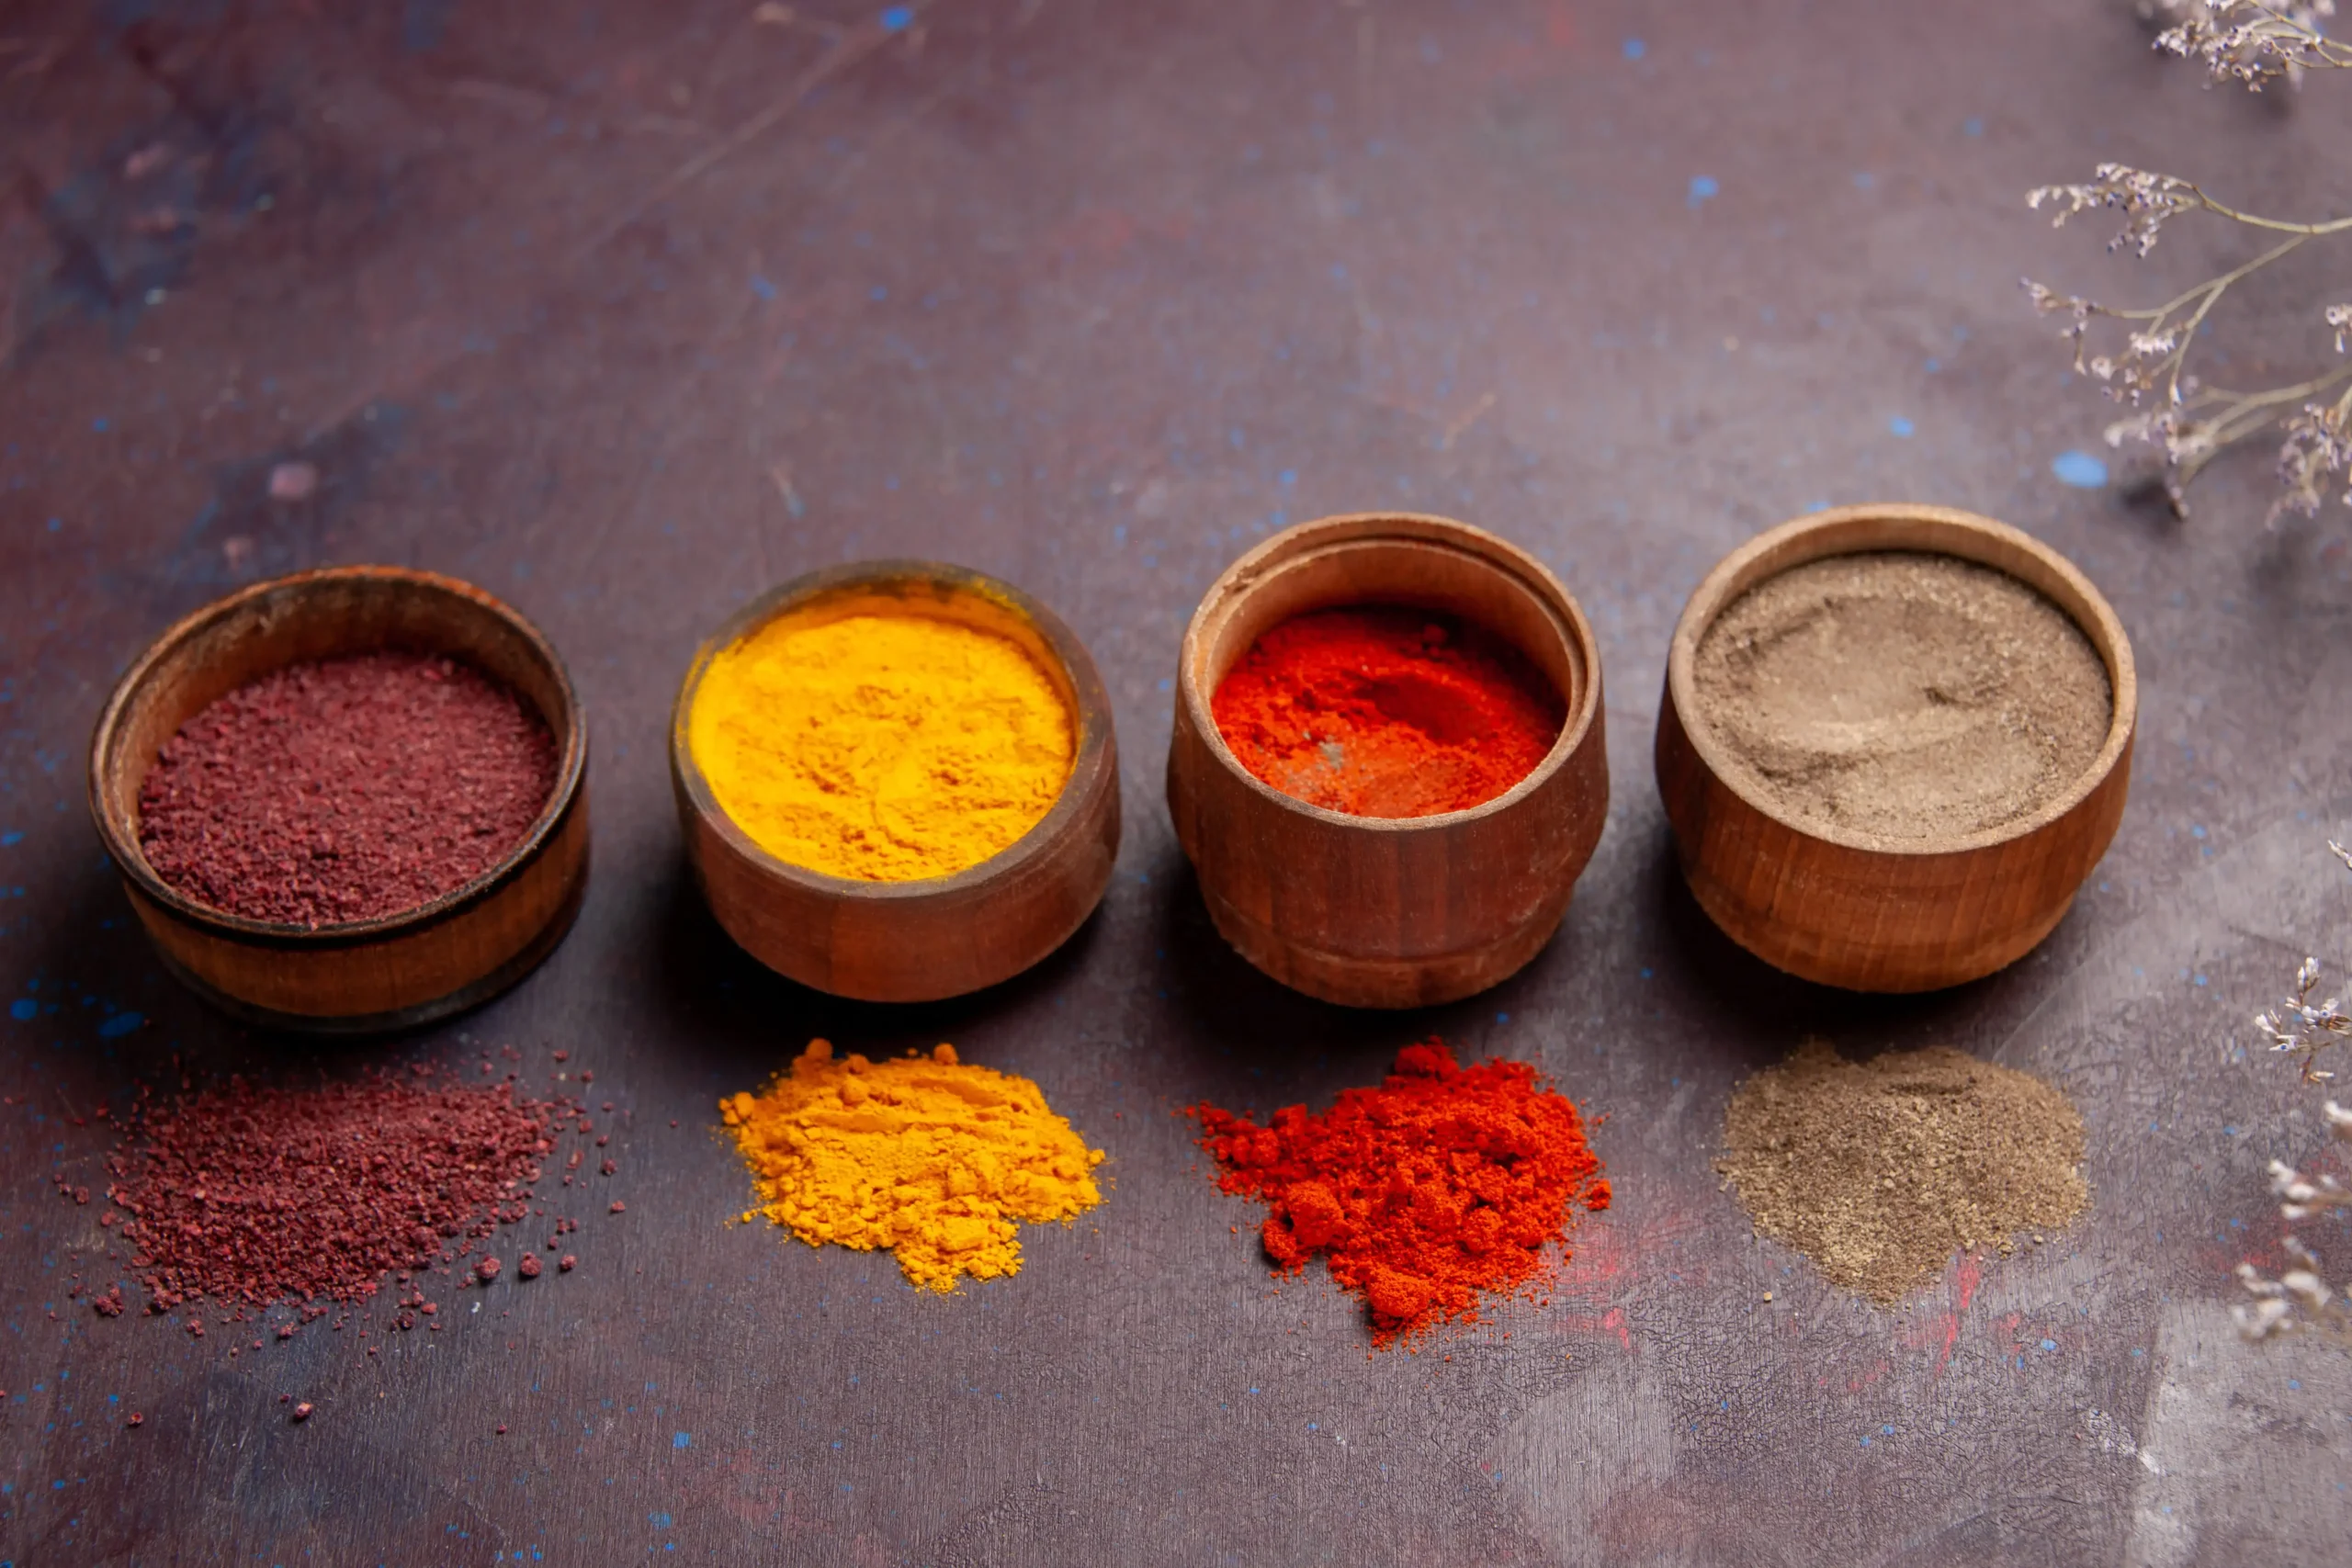 Flavorful Indian spices